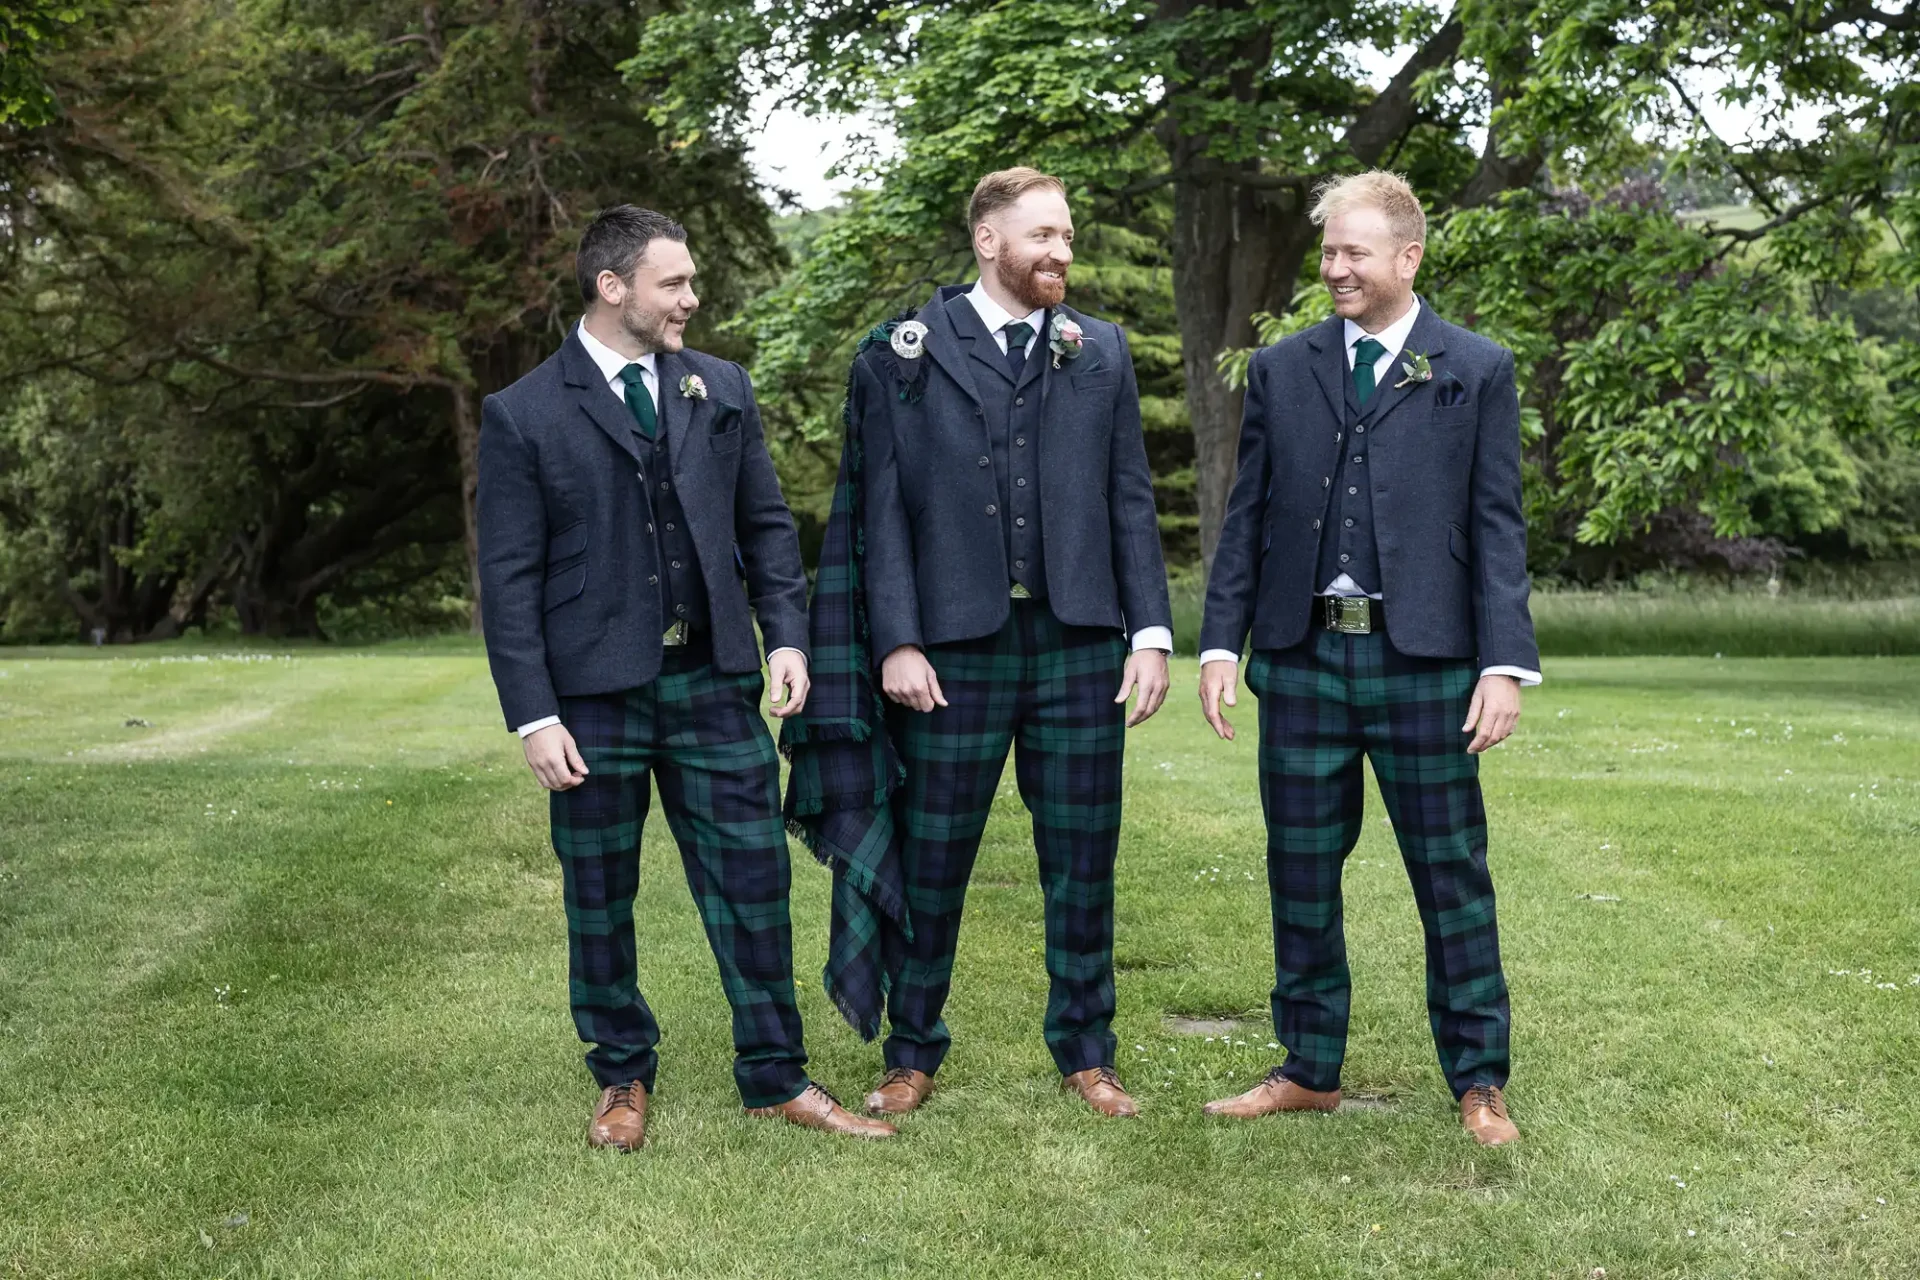 Three men in traditional tartan kilts and dark jackets smiling and standing in a lush green garden.